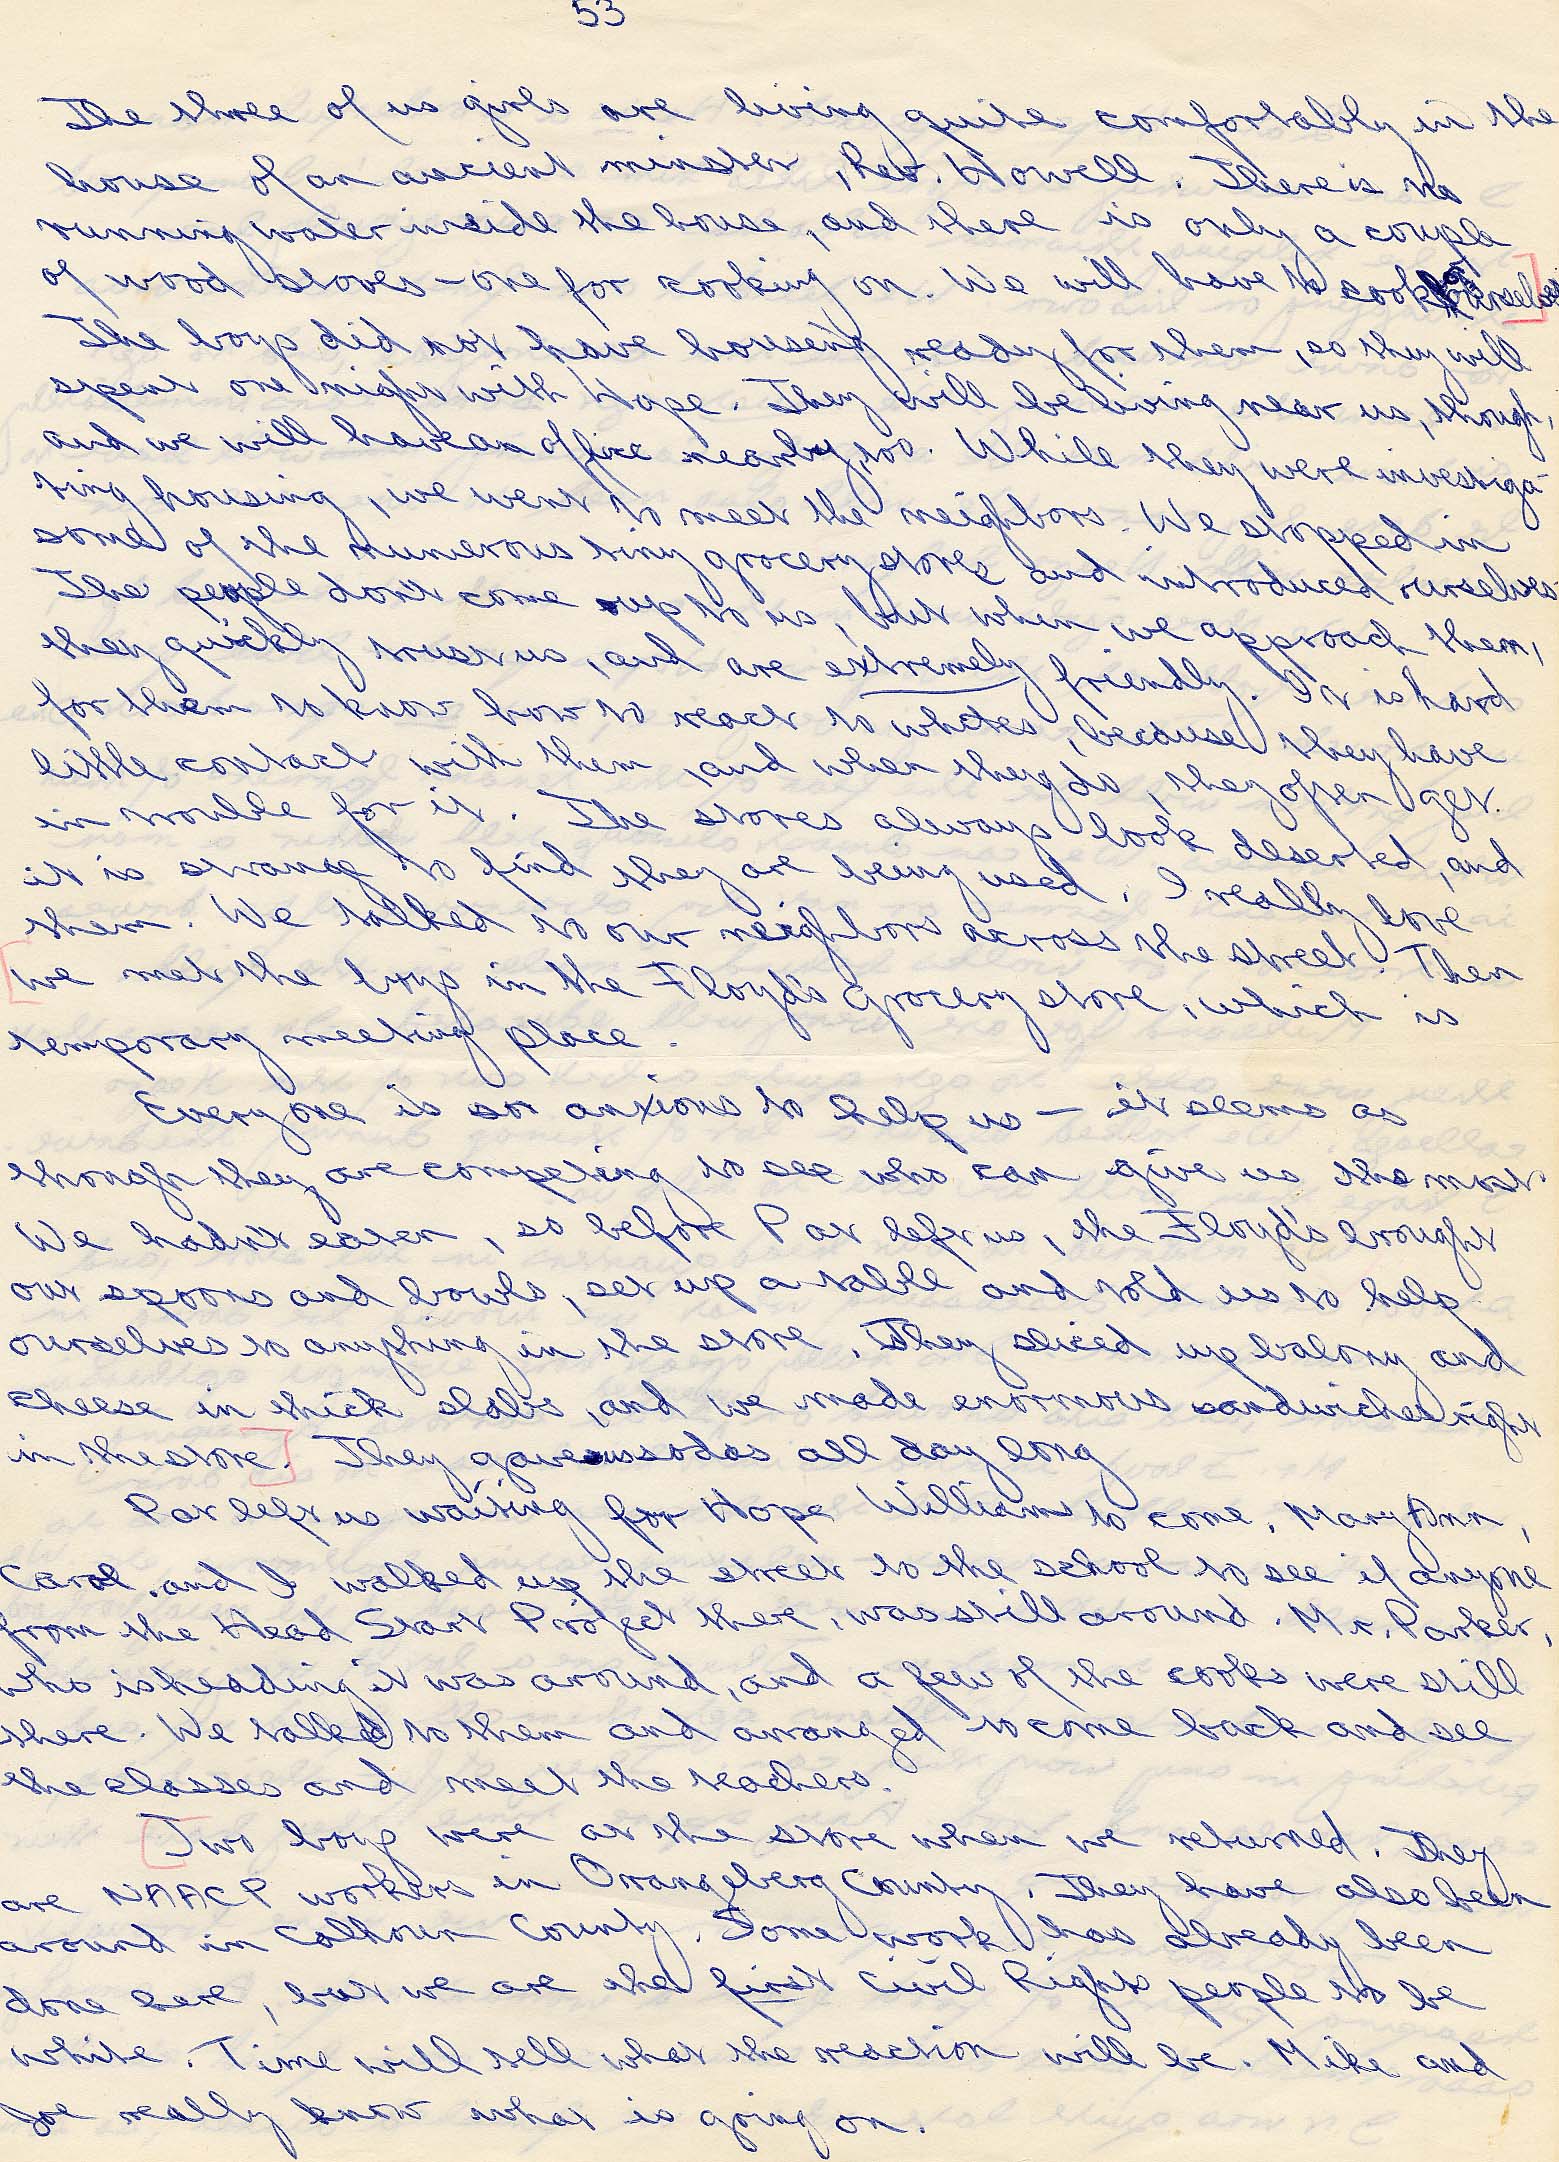 Handwritten page from the diary